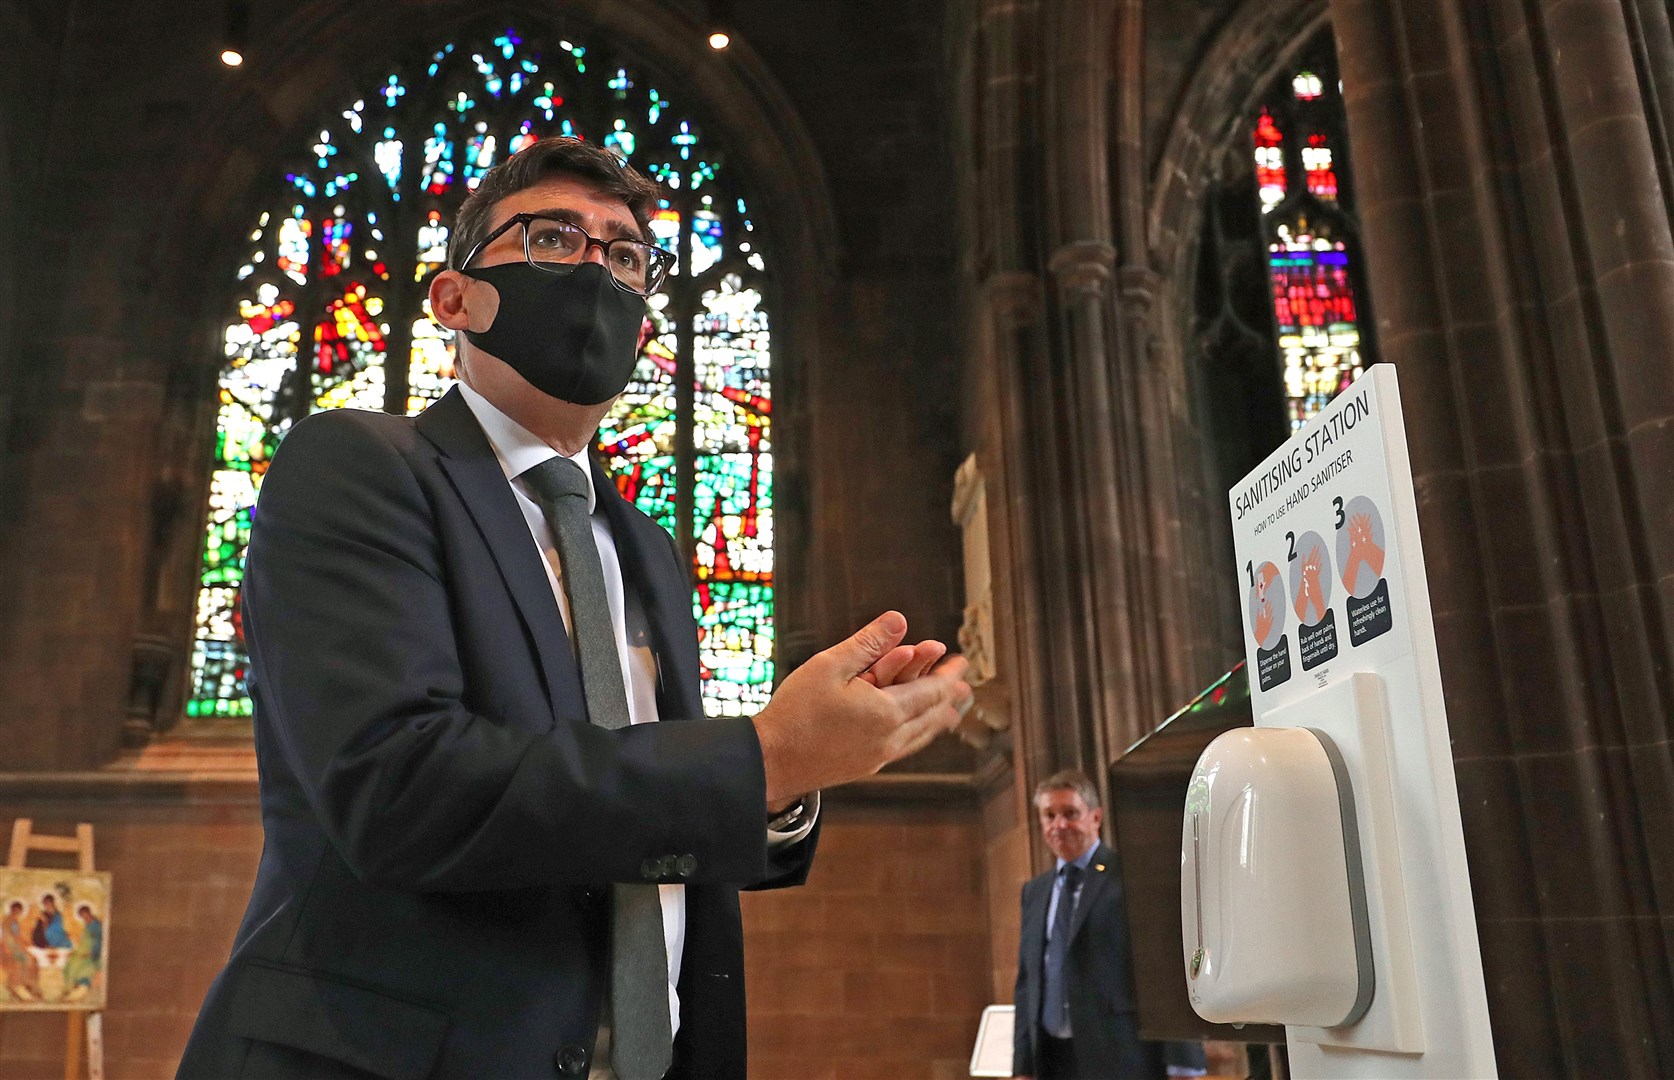 Andy Burnham takes part in a memorial service for the victims of coronavirus at Manchester Cathedral (Martin Rickett/PA)